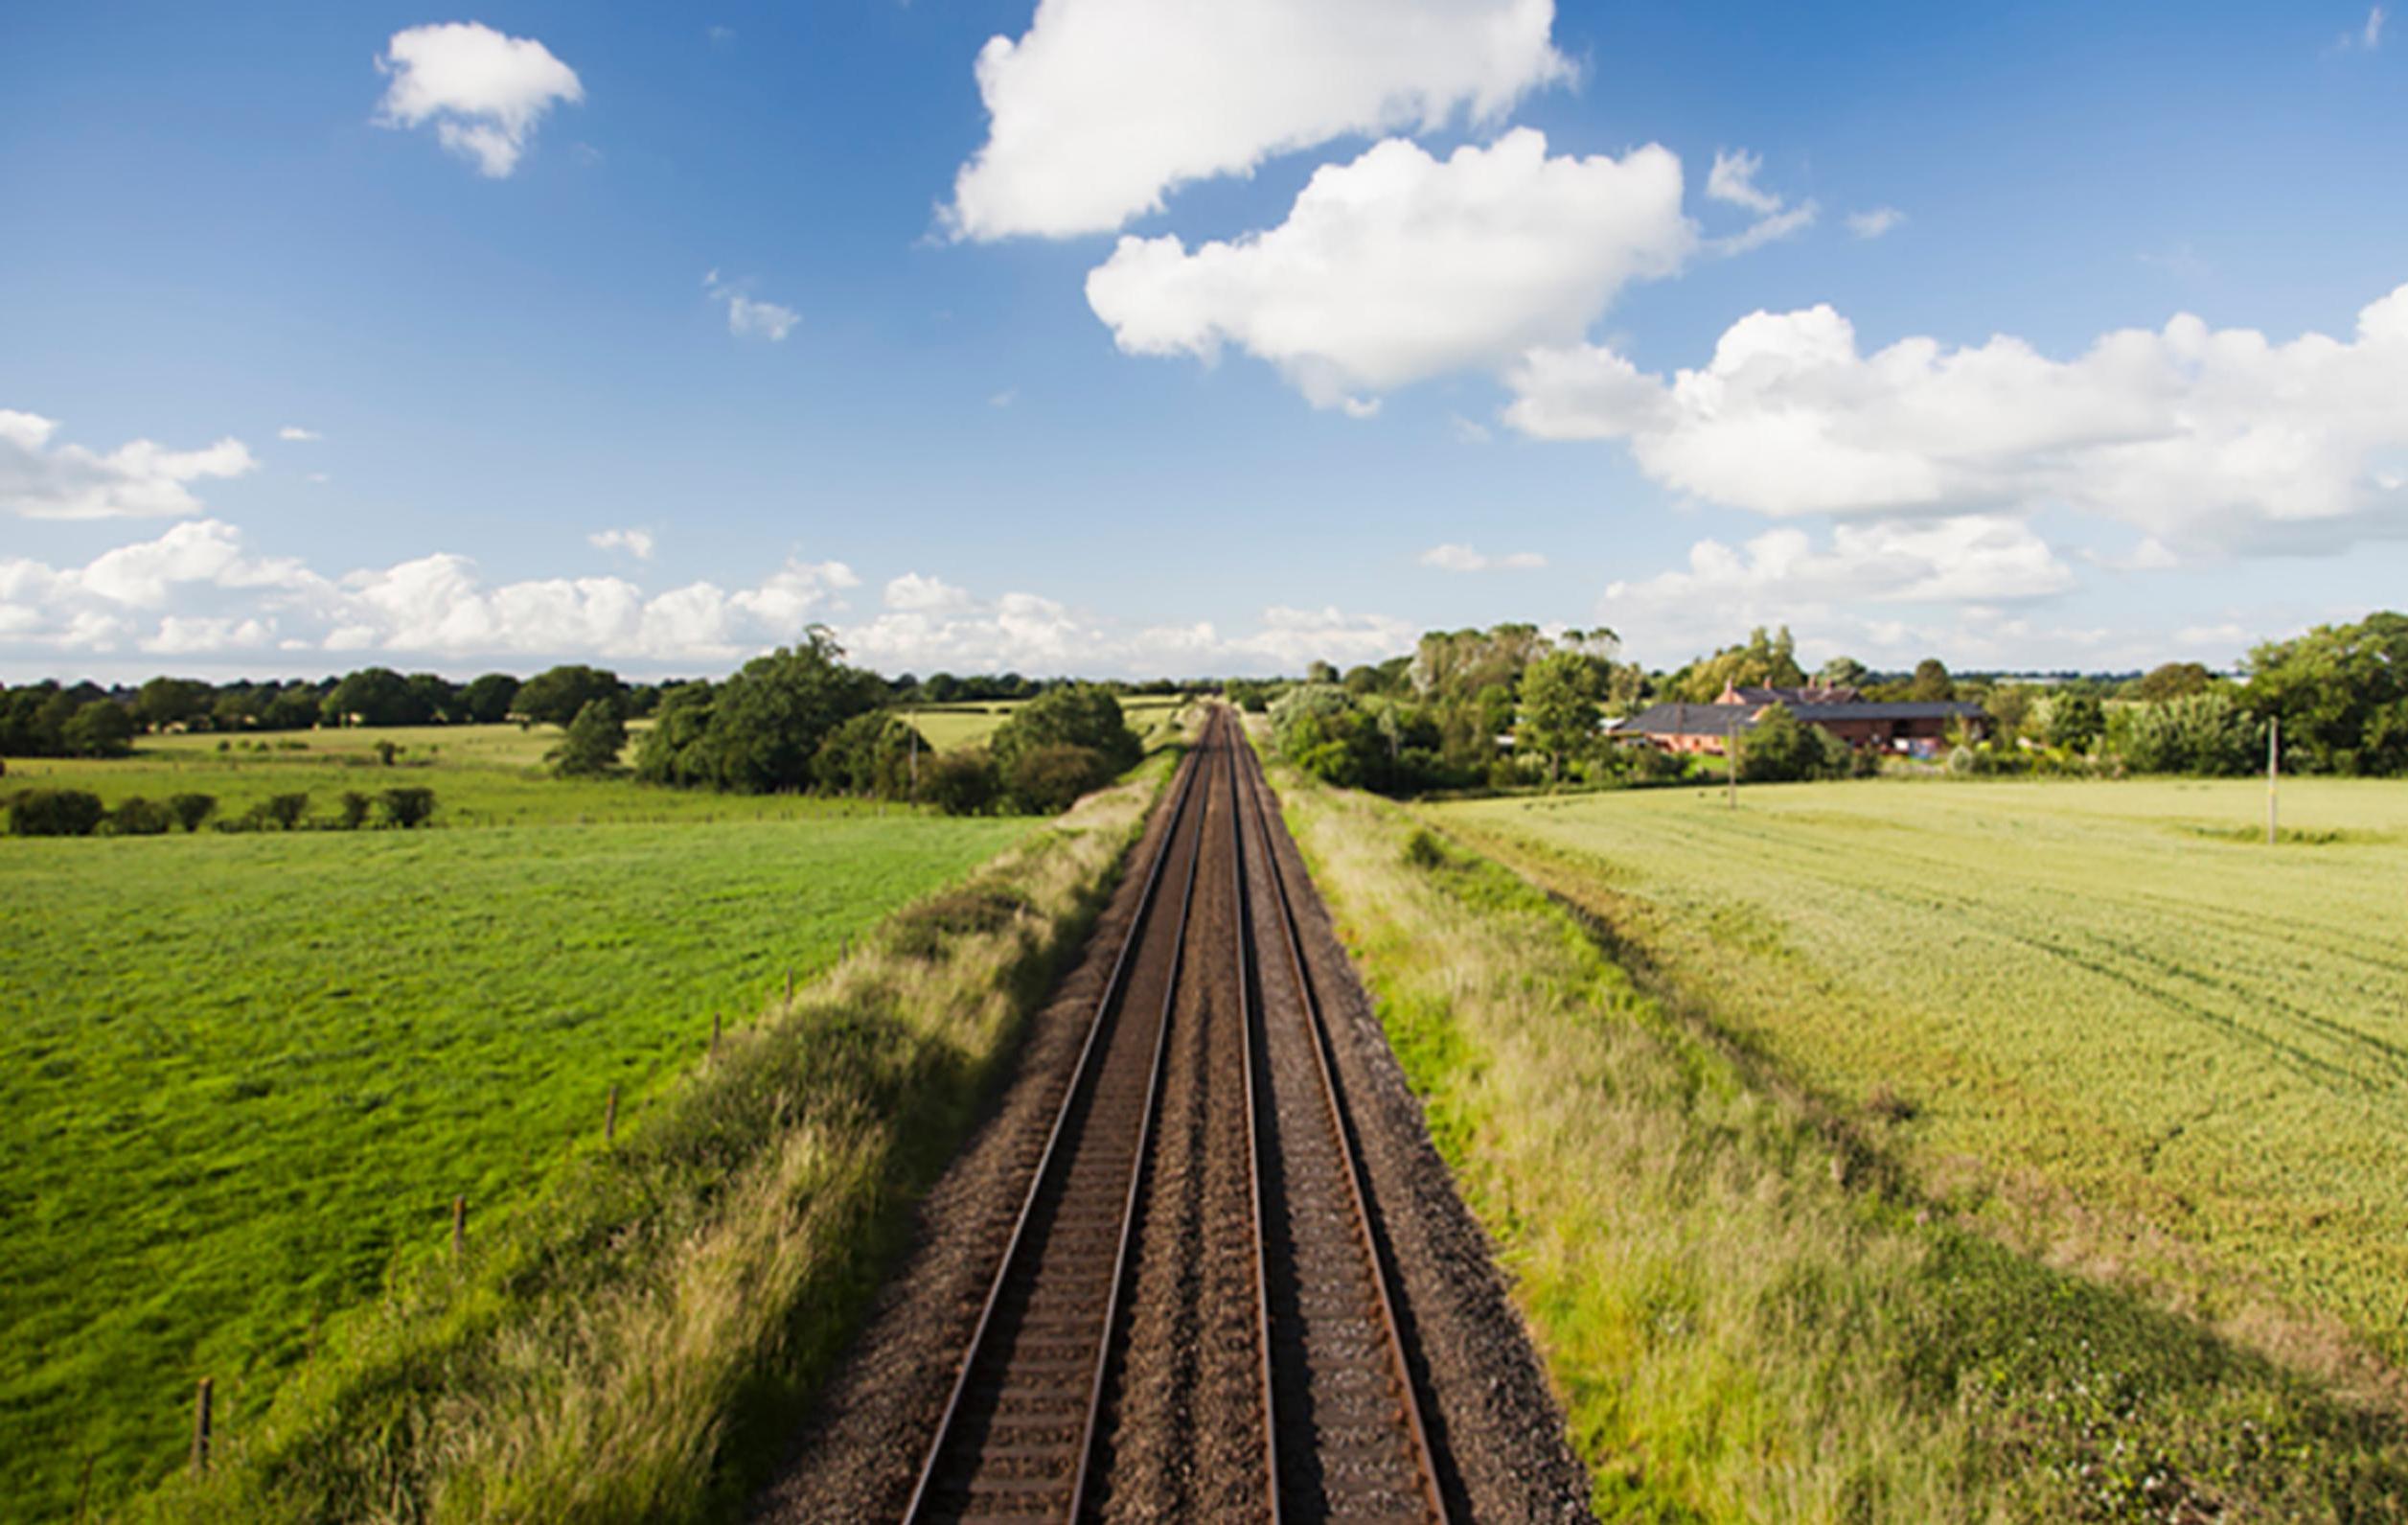 Robert Nisbet, director of nations and regions for the Rail Delivery Group, said: “Rail is already an environmentally friendly way to travel and a fairer playing field on tax combined with reform of fares regulations could see trains play an even bigger role in helping Britain to go green.”